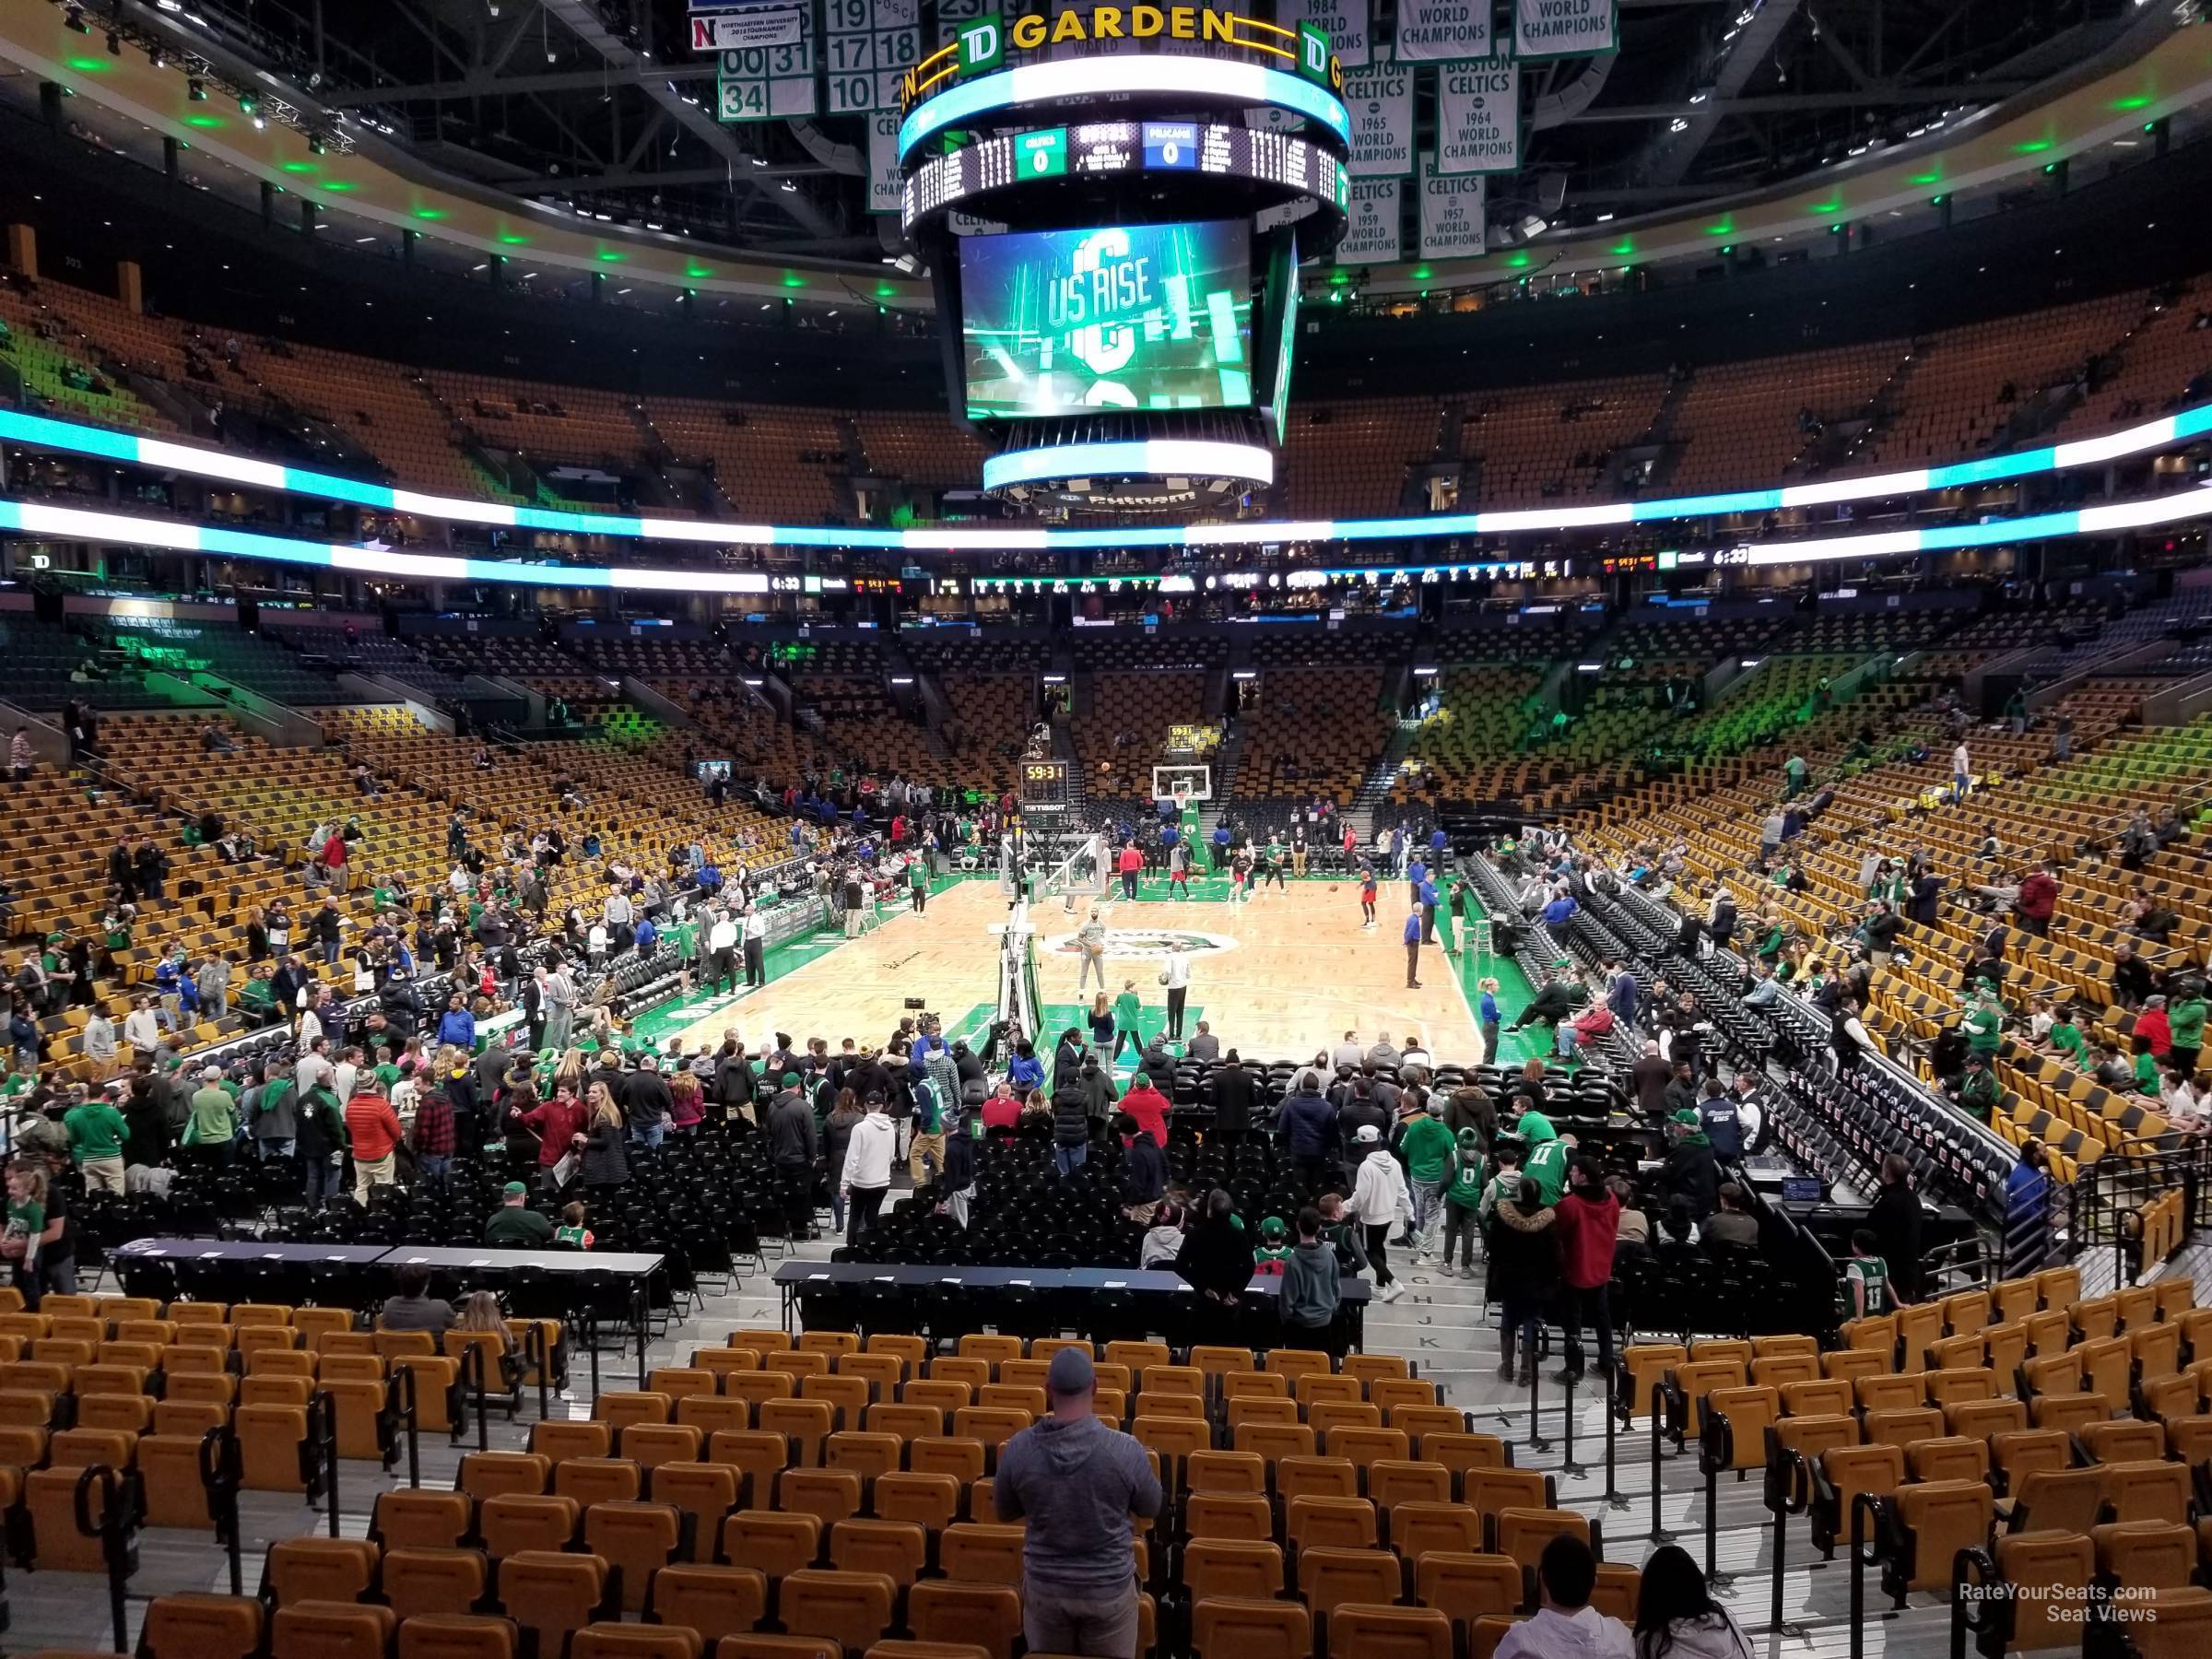 loge 17, row 17 seat view  for basketball - td garden